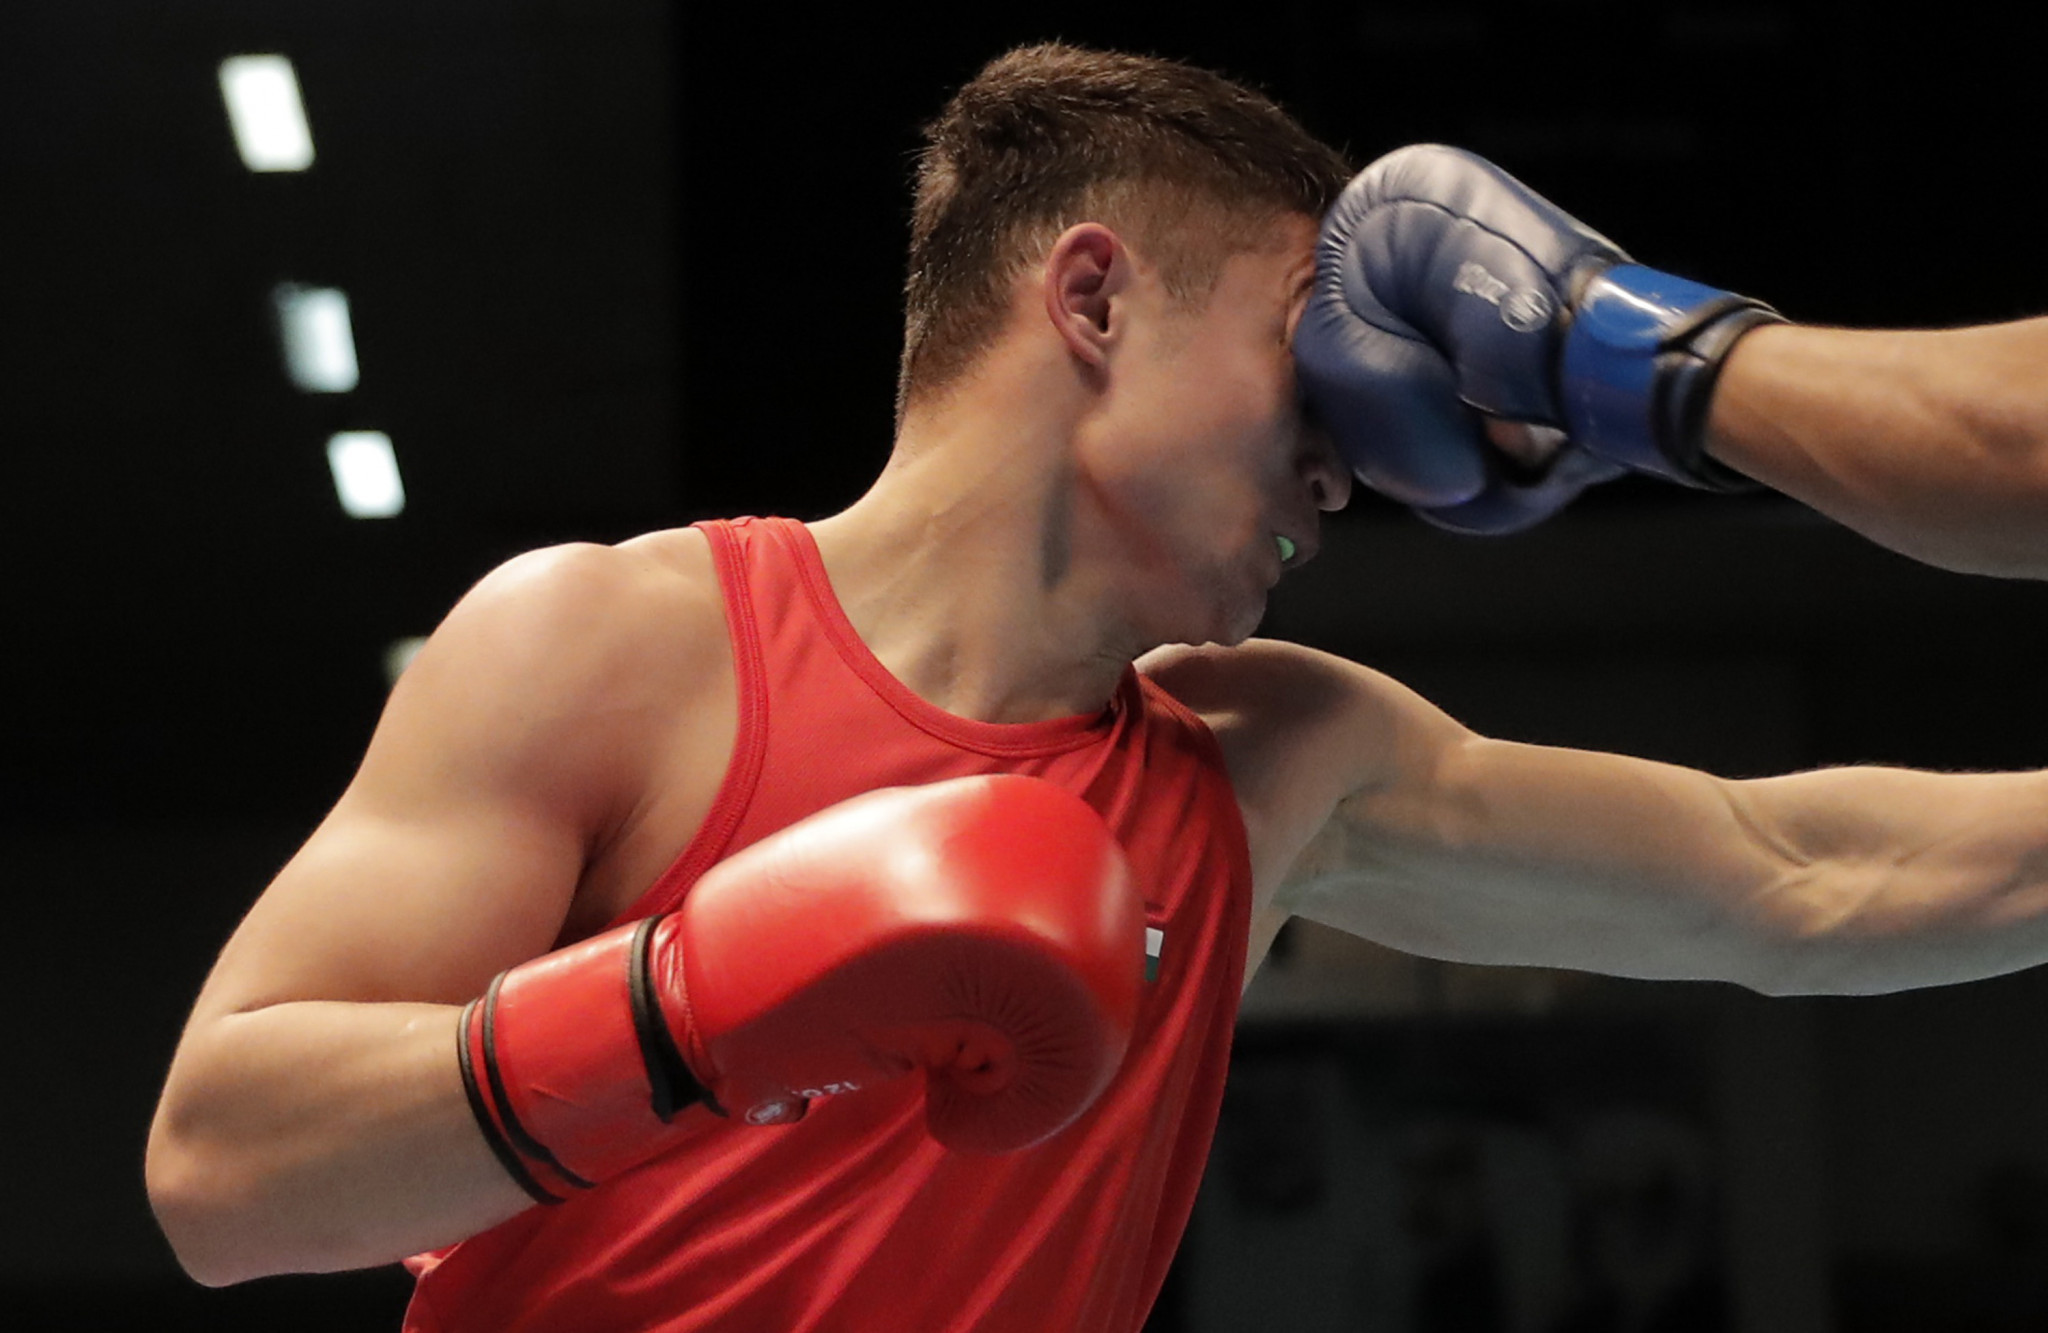 The Asia-Oceania Olympic boxing qualifier was moved to Amman with little time to prepare ©JOC